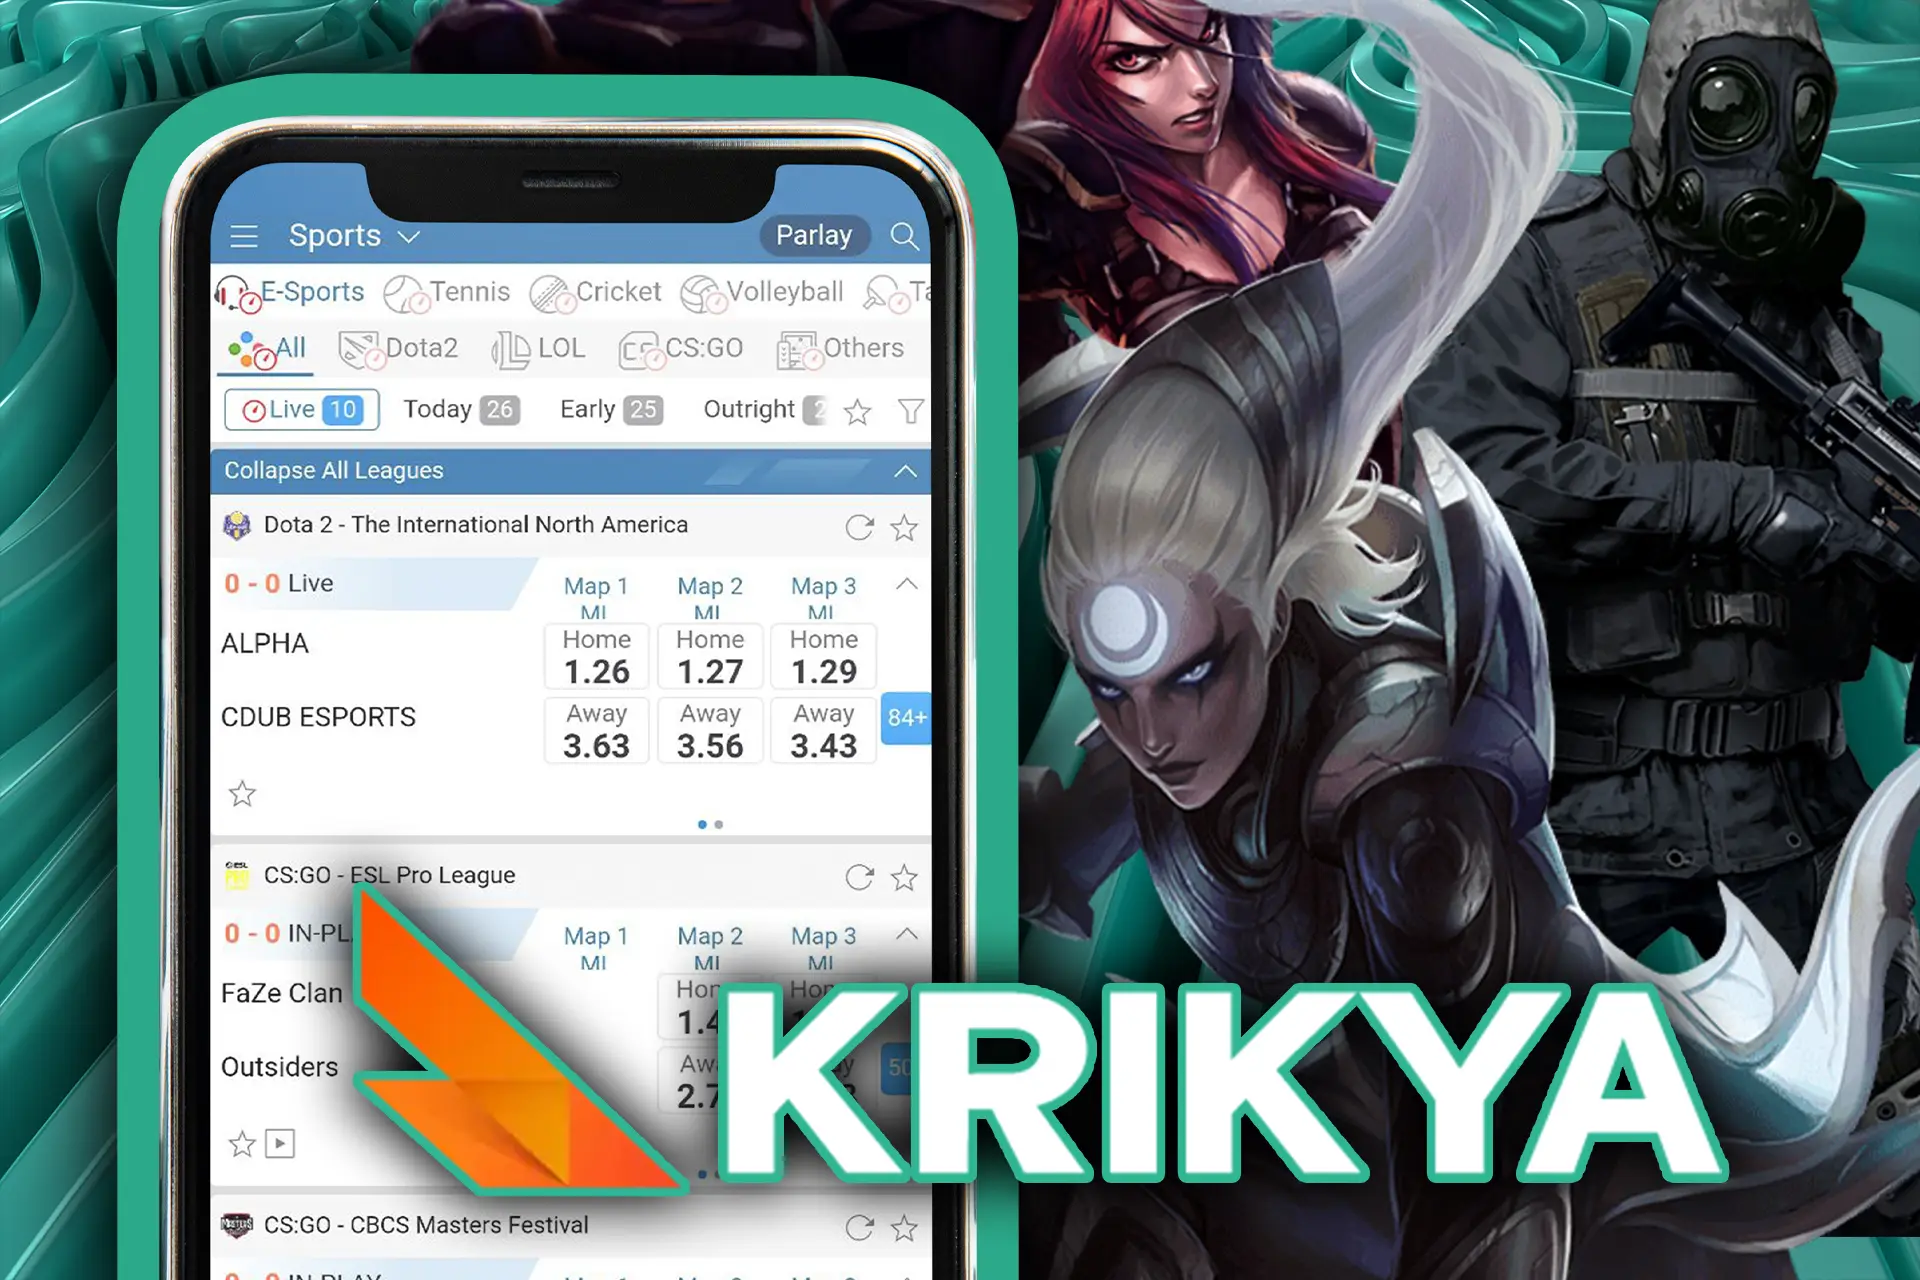 Place bets on DOTA, LOL and other cybersports in the Krikya app.